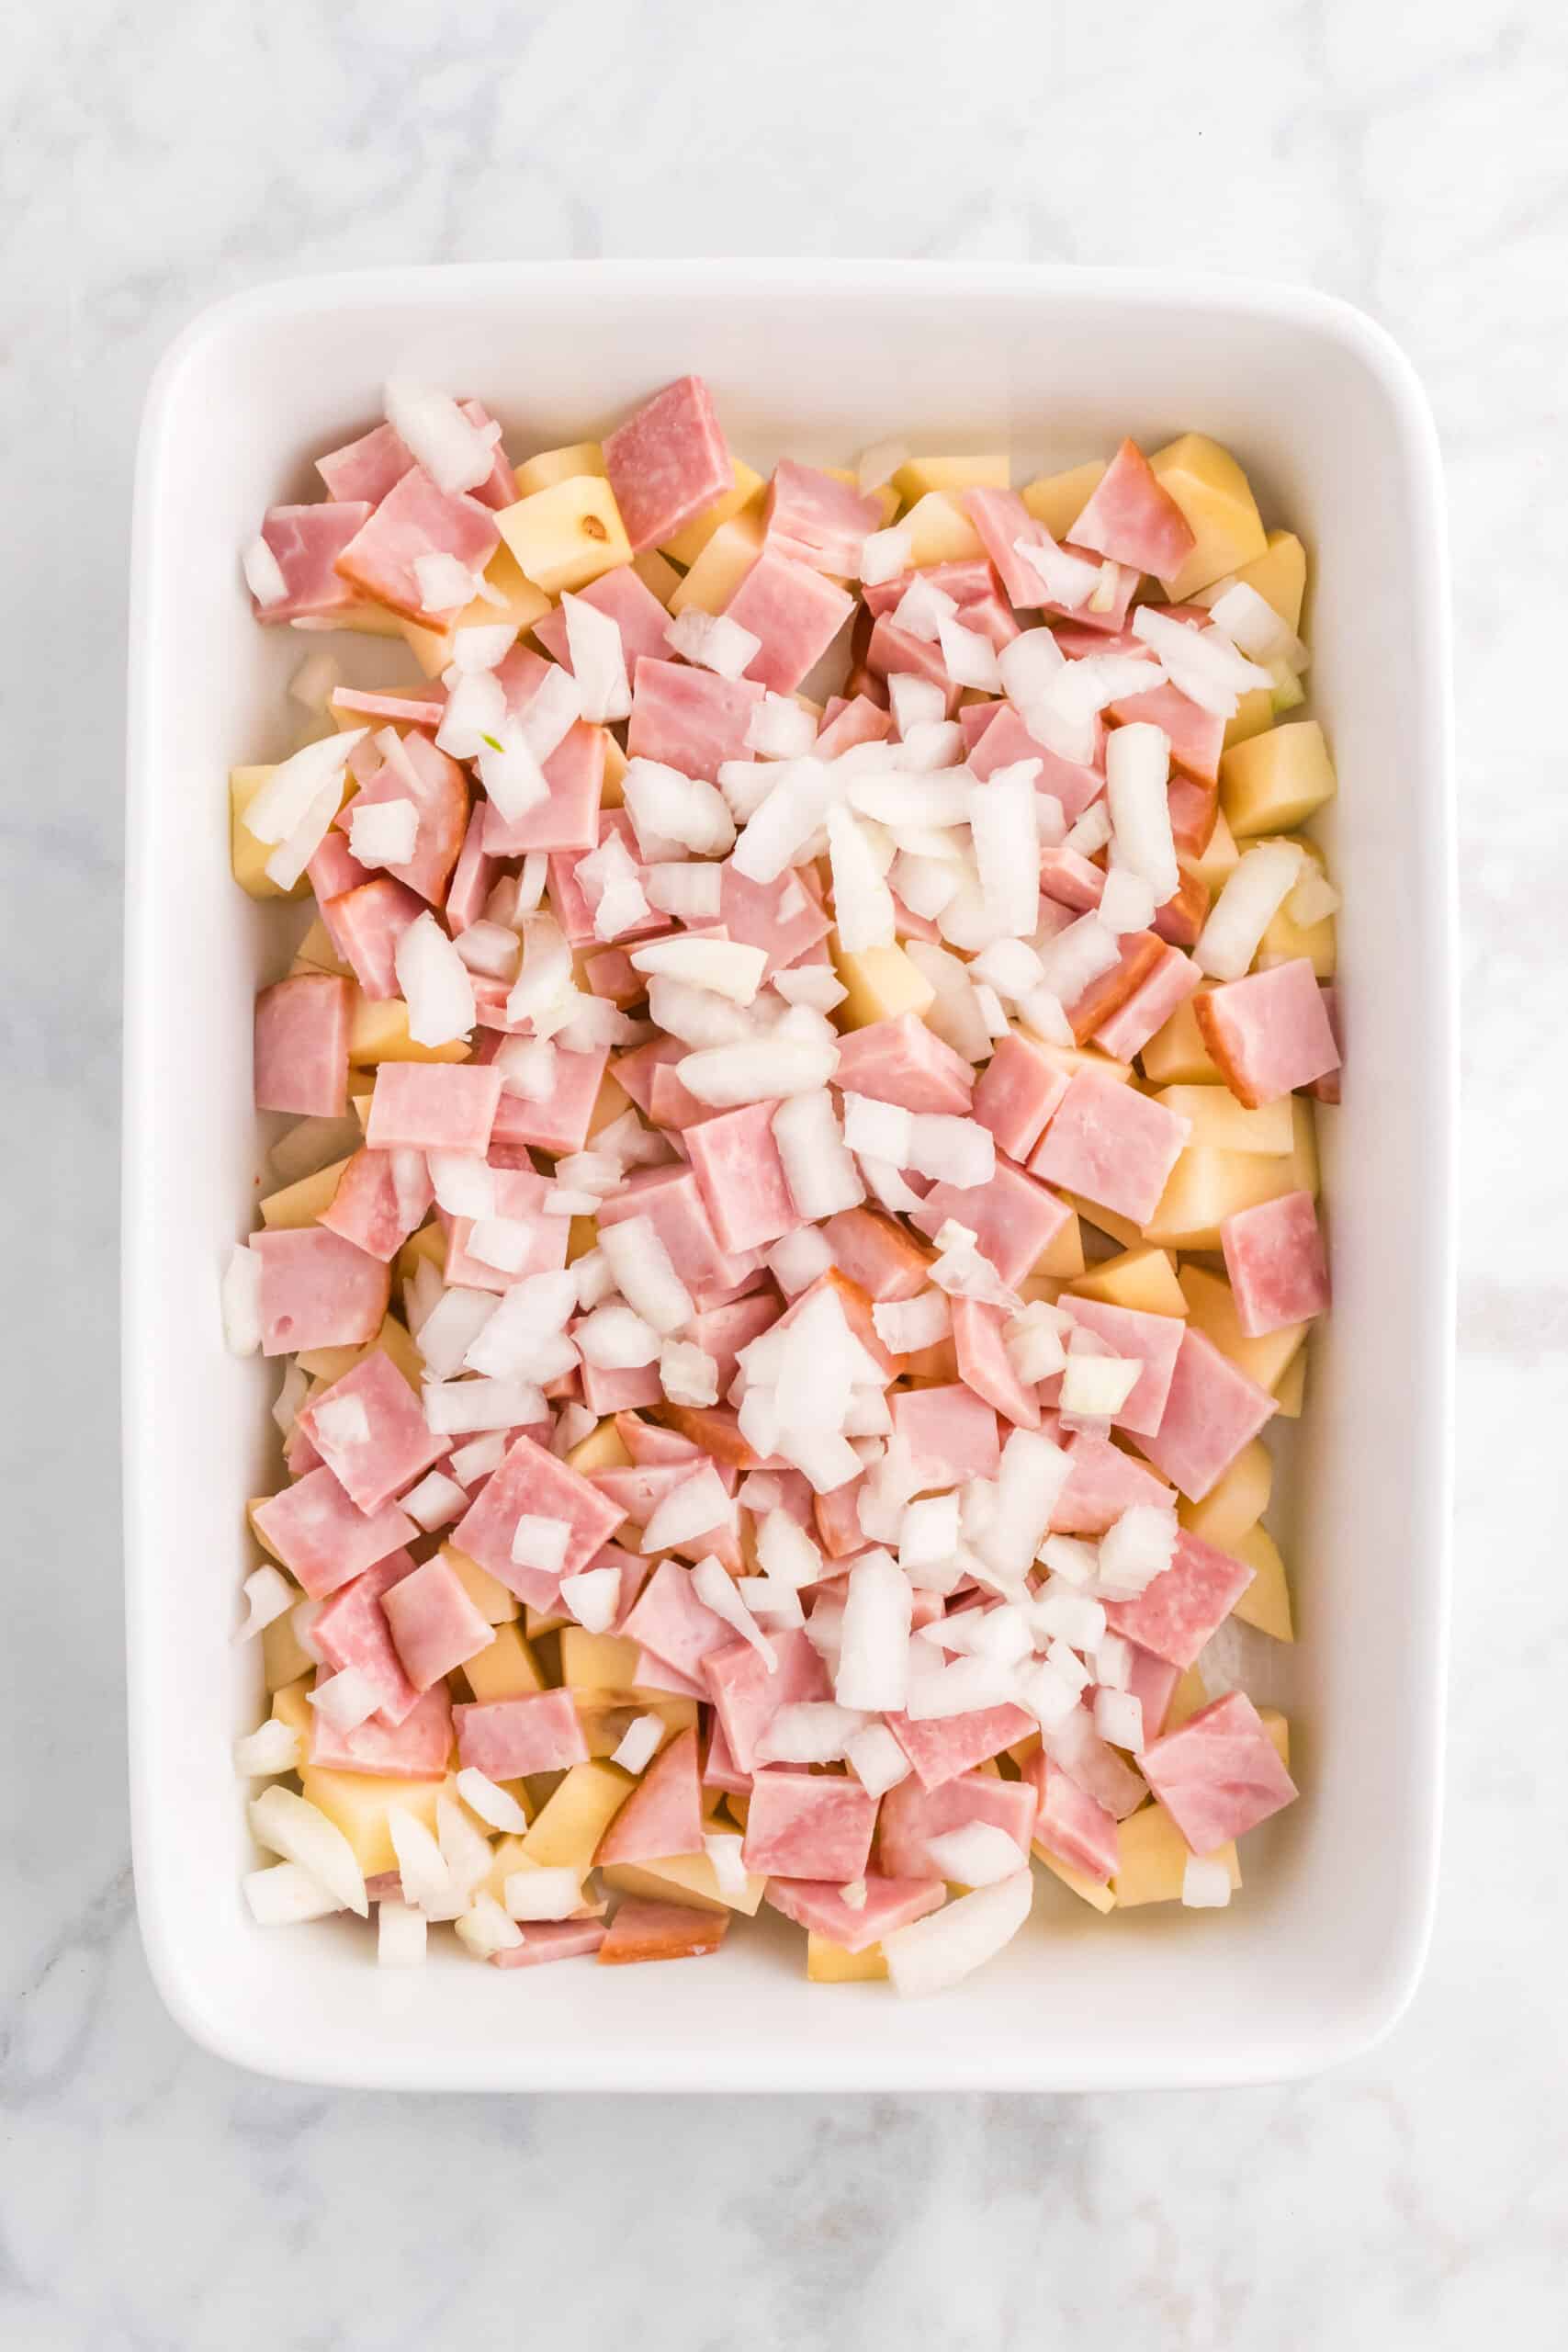 diced ham, potatoes and onions in a baking dish